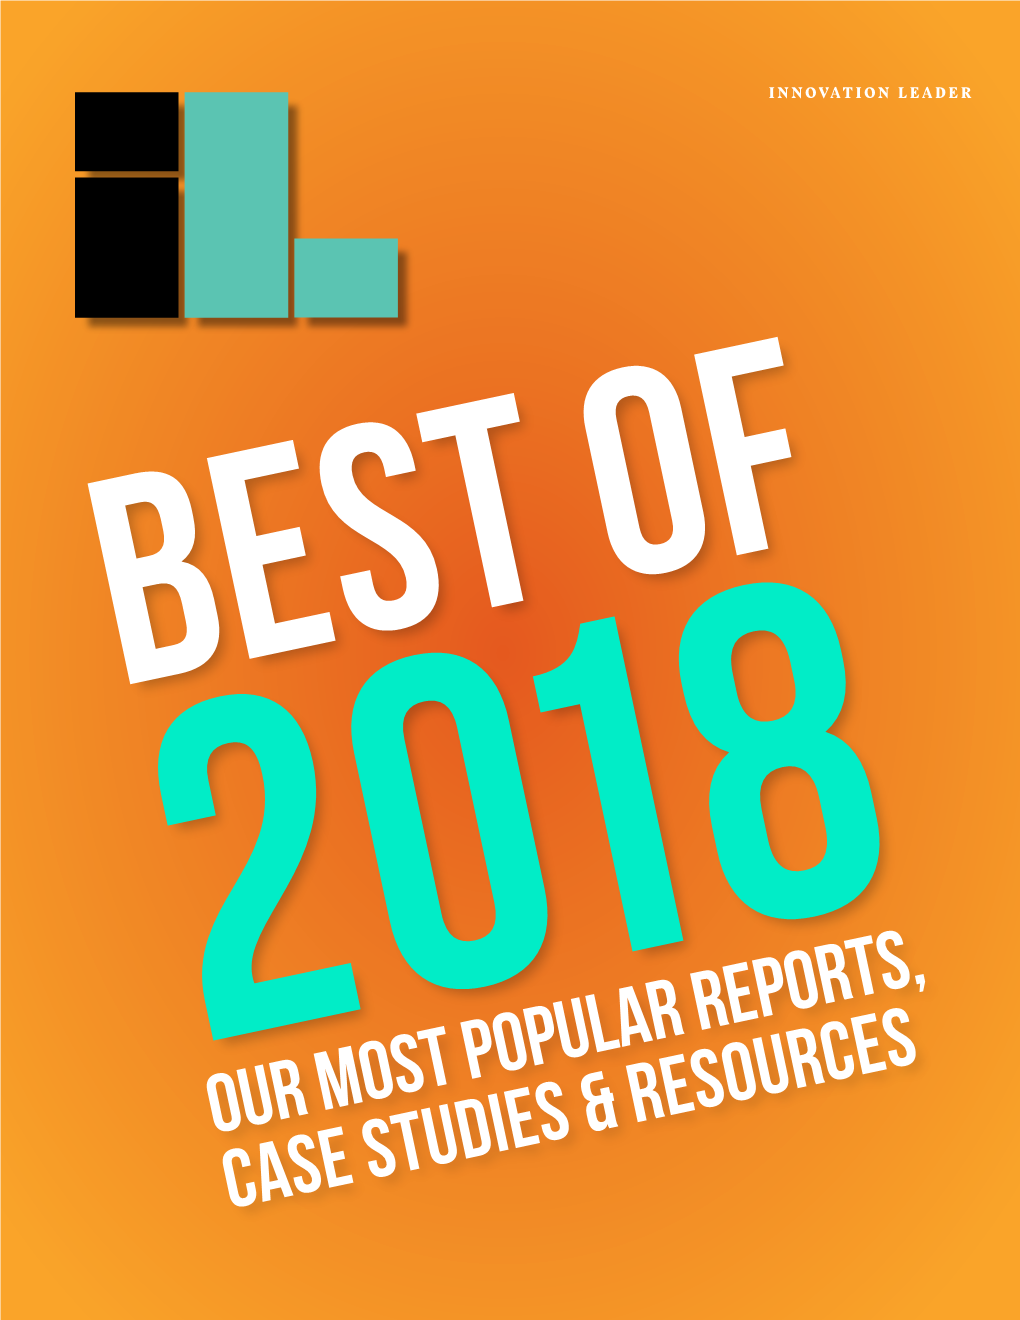 Our Most Popular Reports, CASE STUDIES & Resources